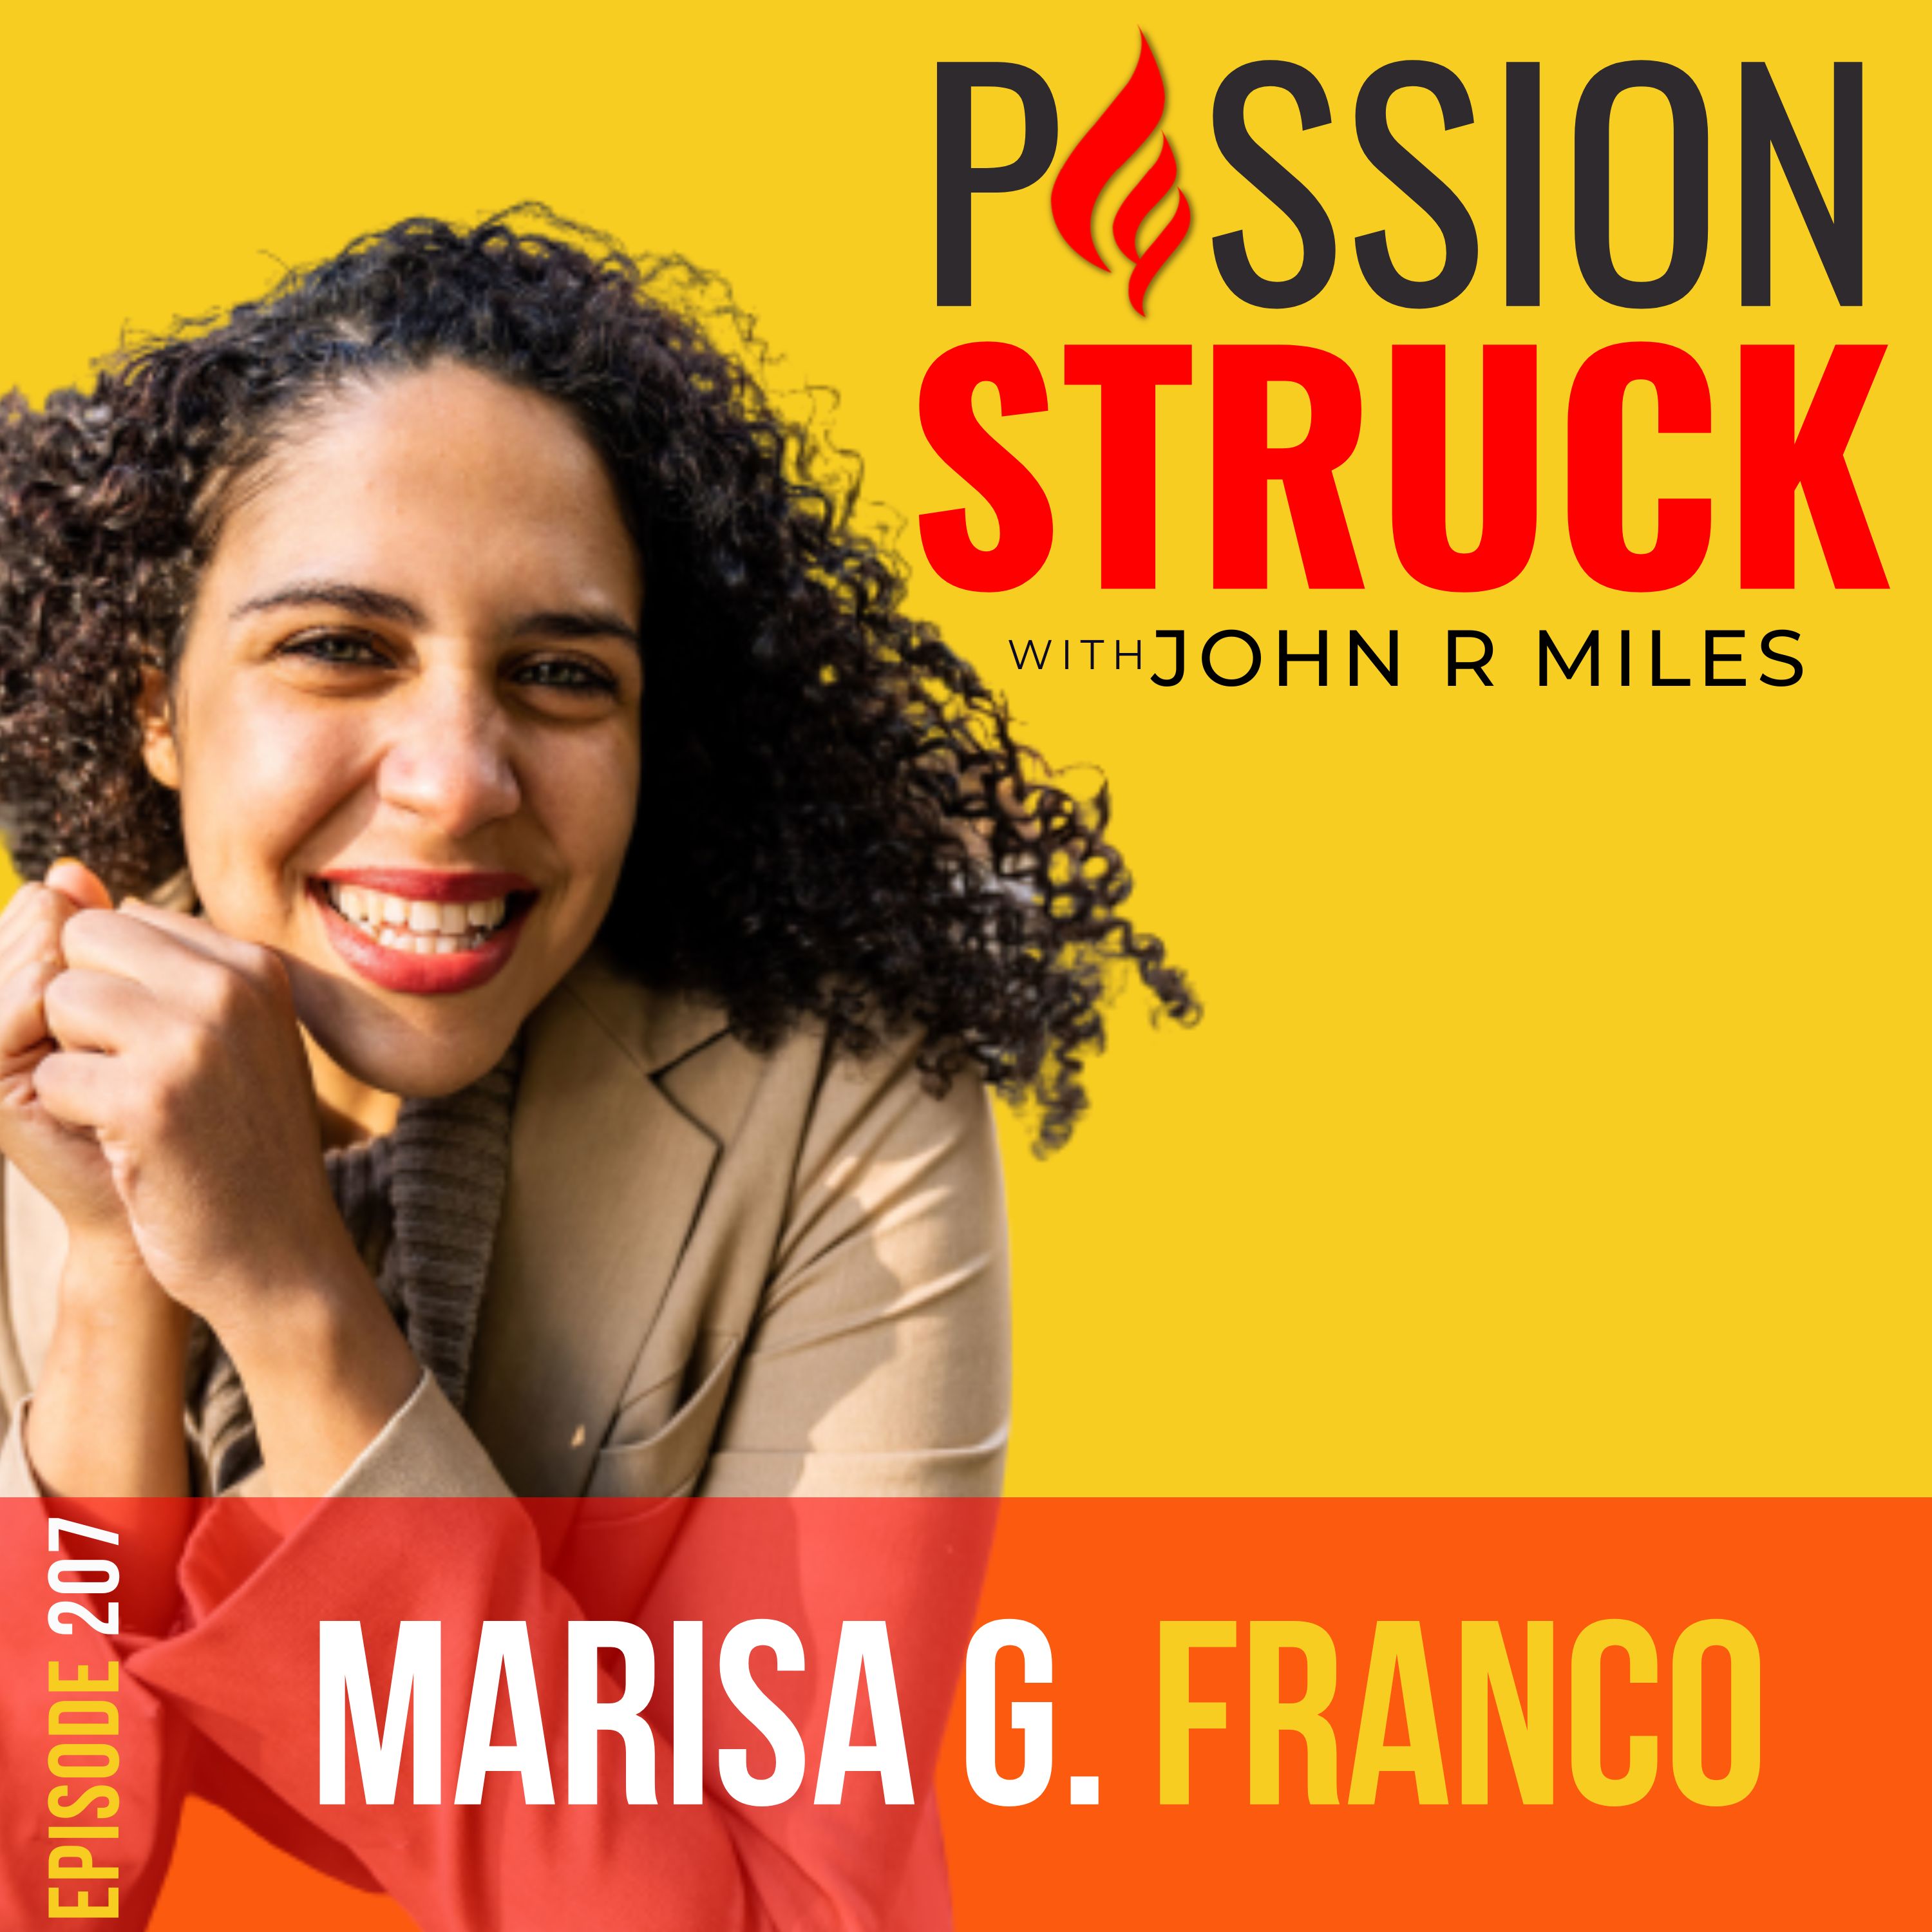 Passion Struck podcast album cover episode 207 with Marisa G. Franco on Platonic and forging deep connections